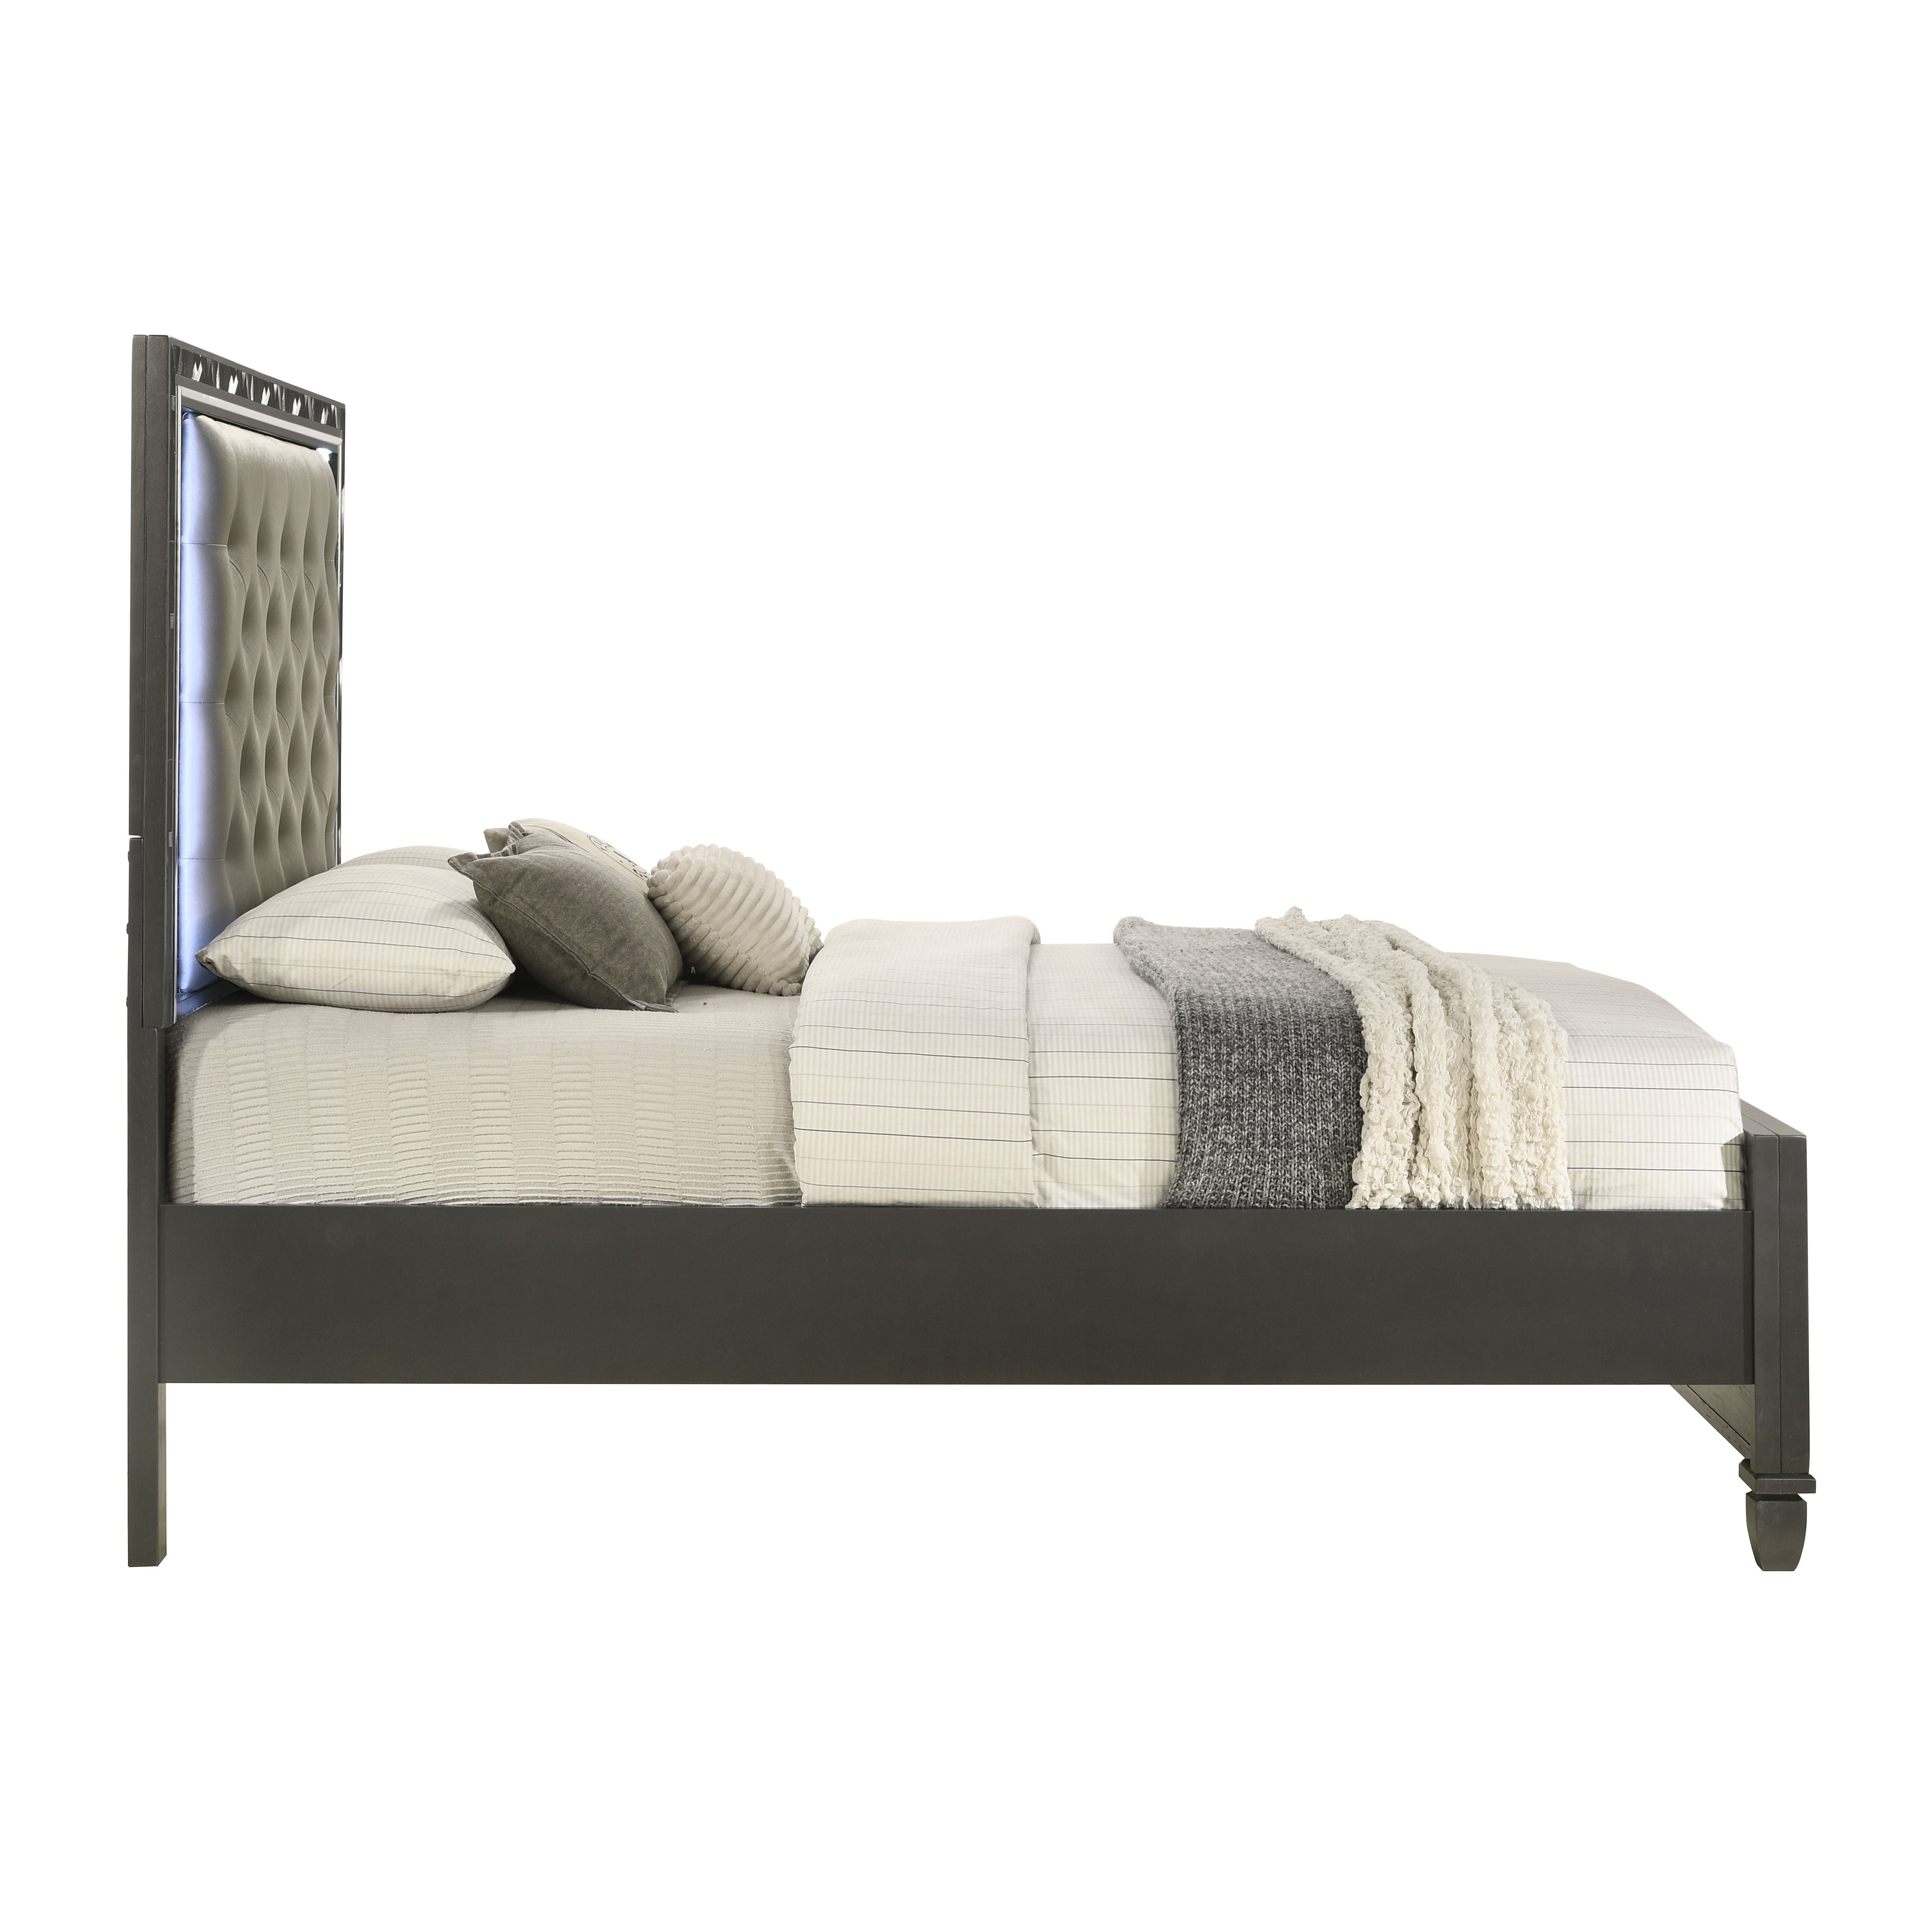 Radiance - 5/0 Queen Bed With Storage Only - Black Pearl